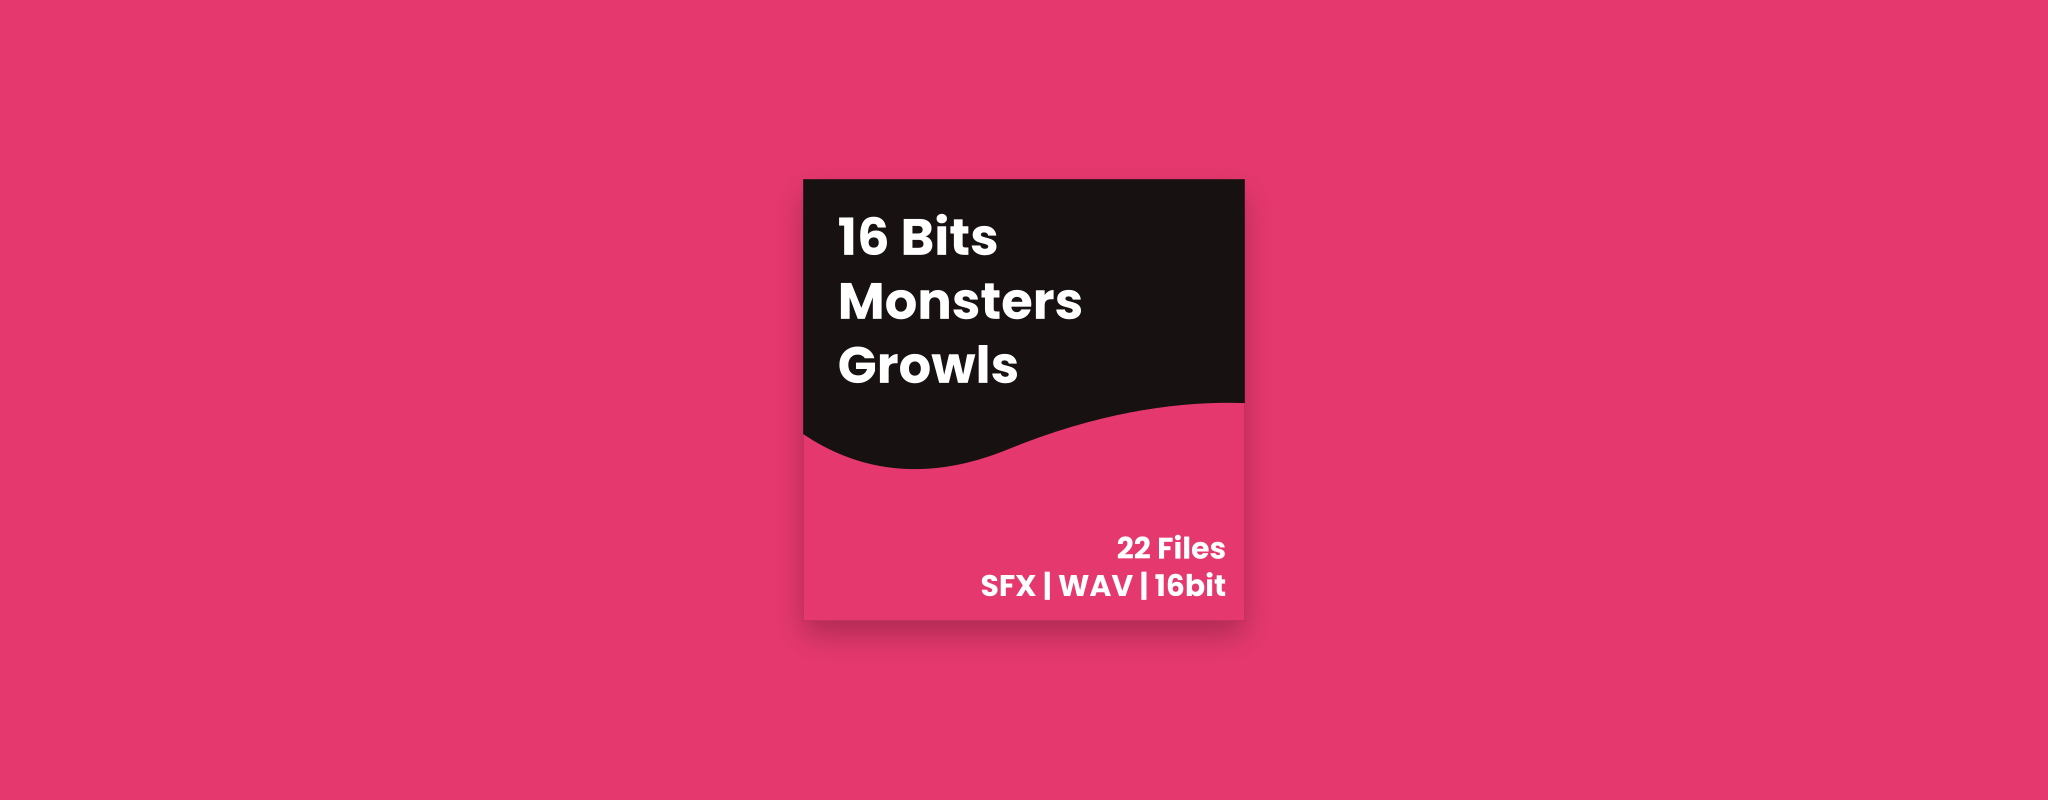 16bits Monsters Growls Pack